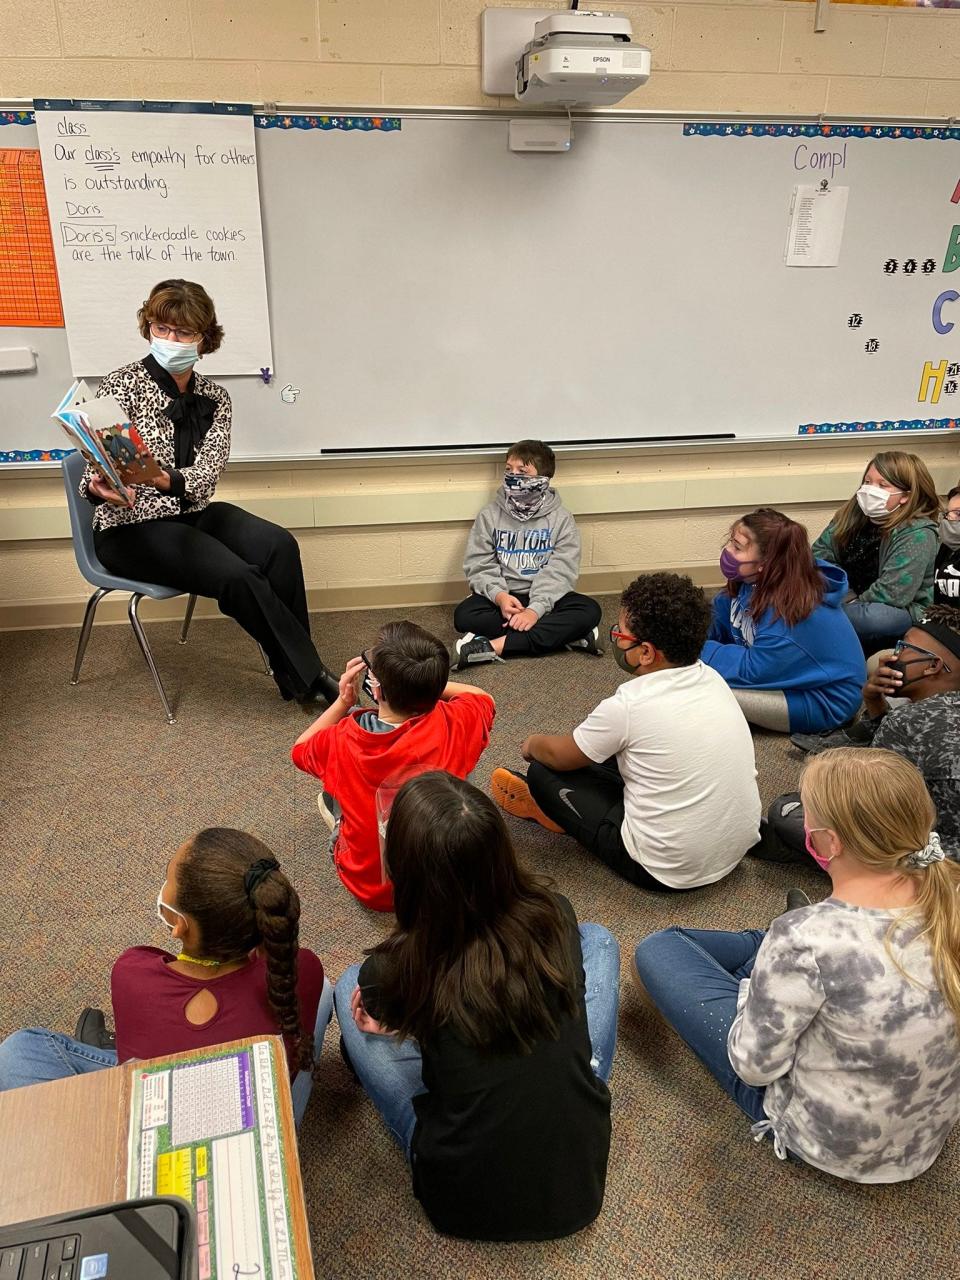 To prepare younger MCS students for incoming refugee families, MCS Director of Public Education and CEO Lee Ann Kwiatkowski reads the book "What is a Refugee?" to a fourth grade class at North View Elementary in 2021.